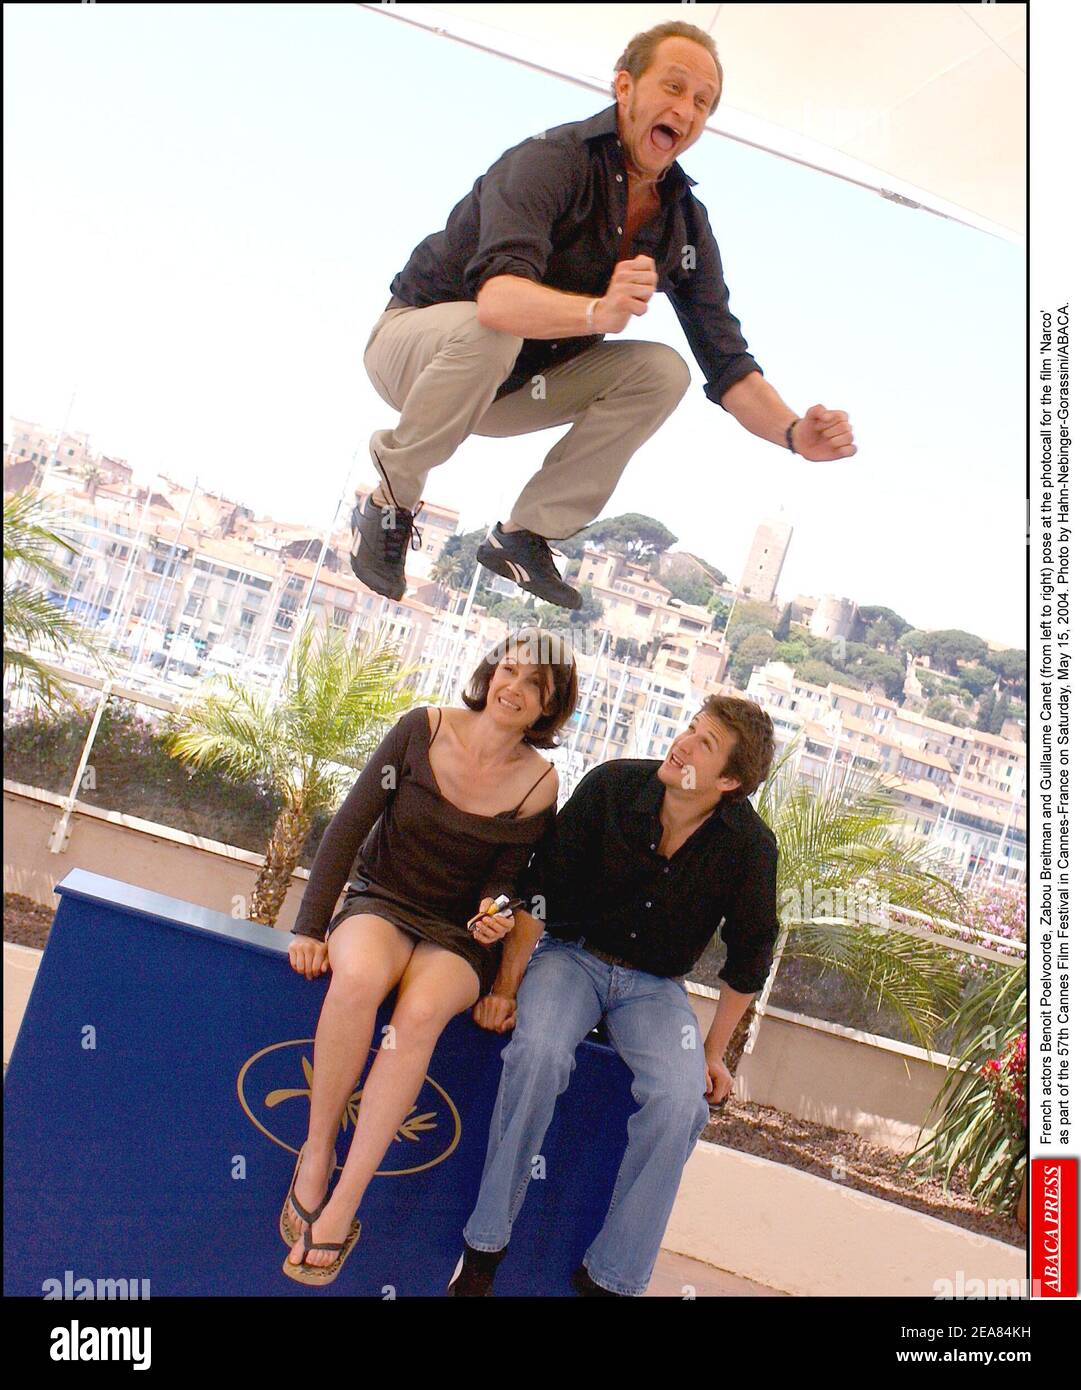 Actors Benoit Poelvoorde, Zabou Breitman and Guillaume Canet (from left to right) pose at the photocall for the film 'Narco' as part of the 57th Cannes Film Festival in Cannes-France on Saturday, May 15, 2004. Photo by Hahn-Nebinger-Gorassini/ABACA. Stock Photo